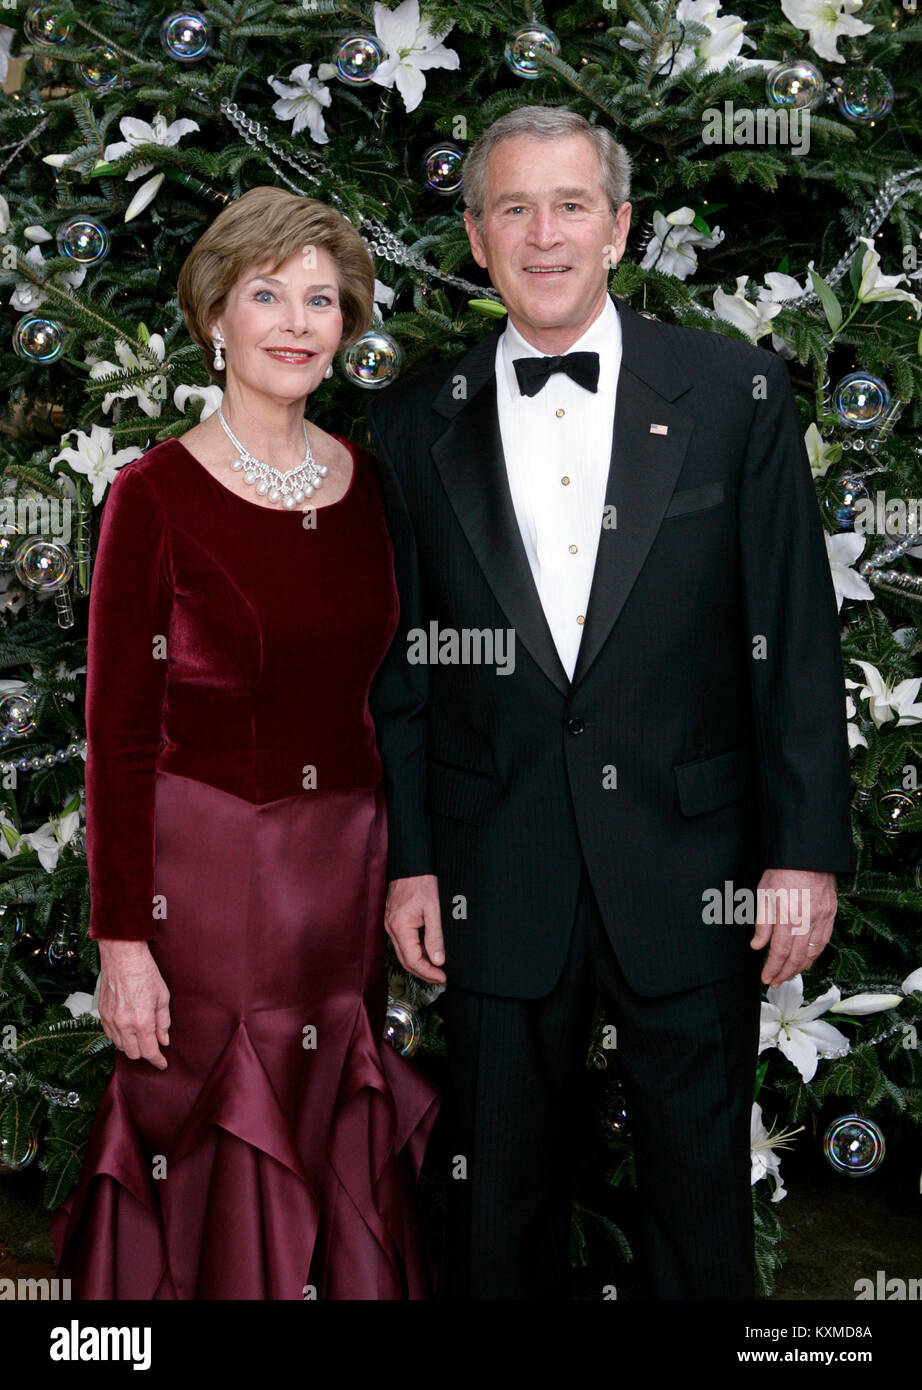 United States President George W. Bush and first lady Laura Bush pose for their Official Holiday Portrait near the White House Christmas tree in the Blue Room of the White House in Washington, D.C. on December 4, 2005.  In keeping with this year's theme, 'All Things Bright and Beautiful!' the Fraser fir is decorated with fresh white lilies. Mandatory Credit: Eric Draper - White House via CNP /MediaPunch Stock Photo